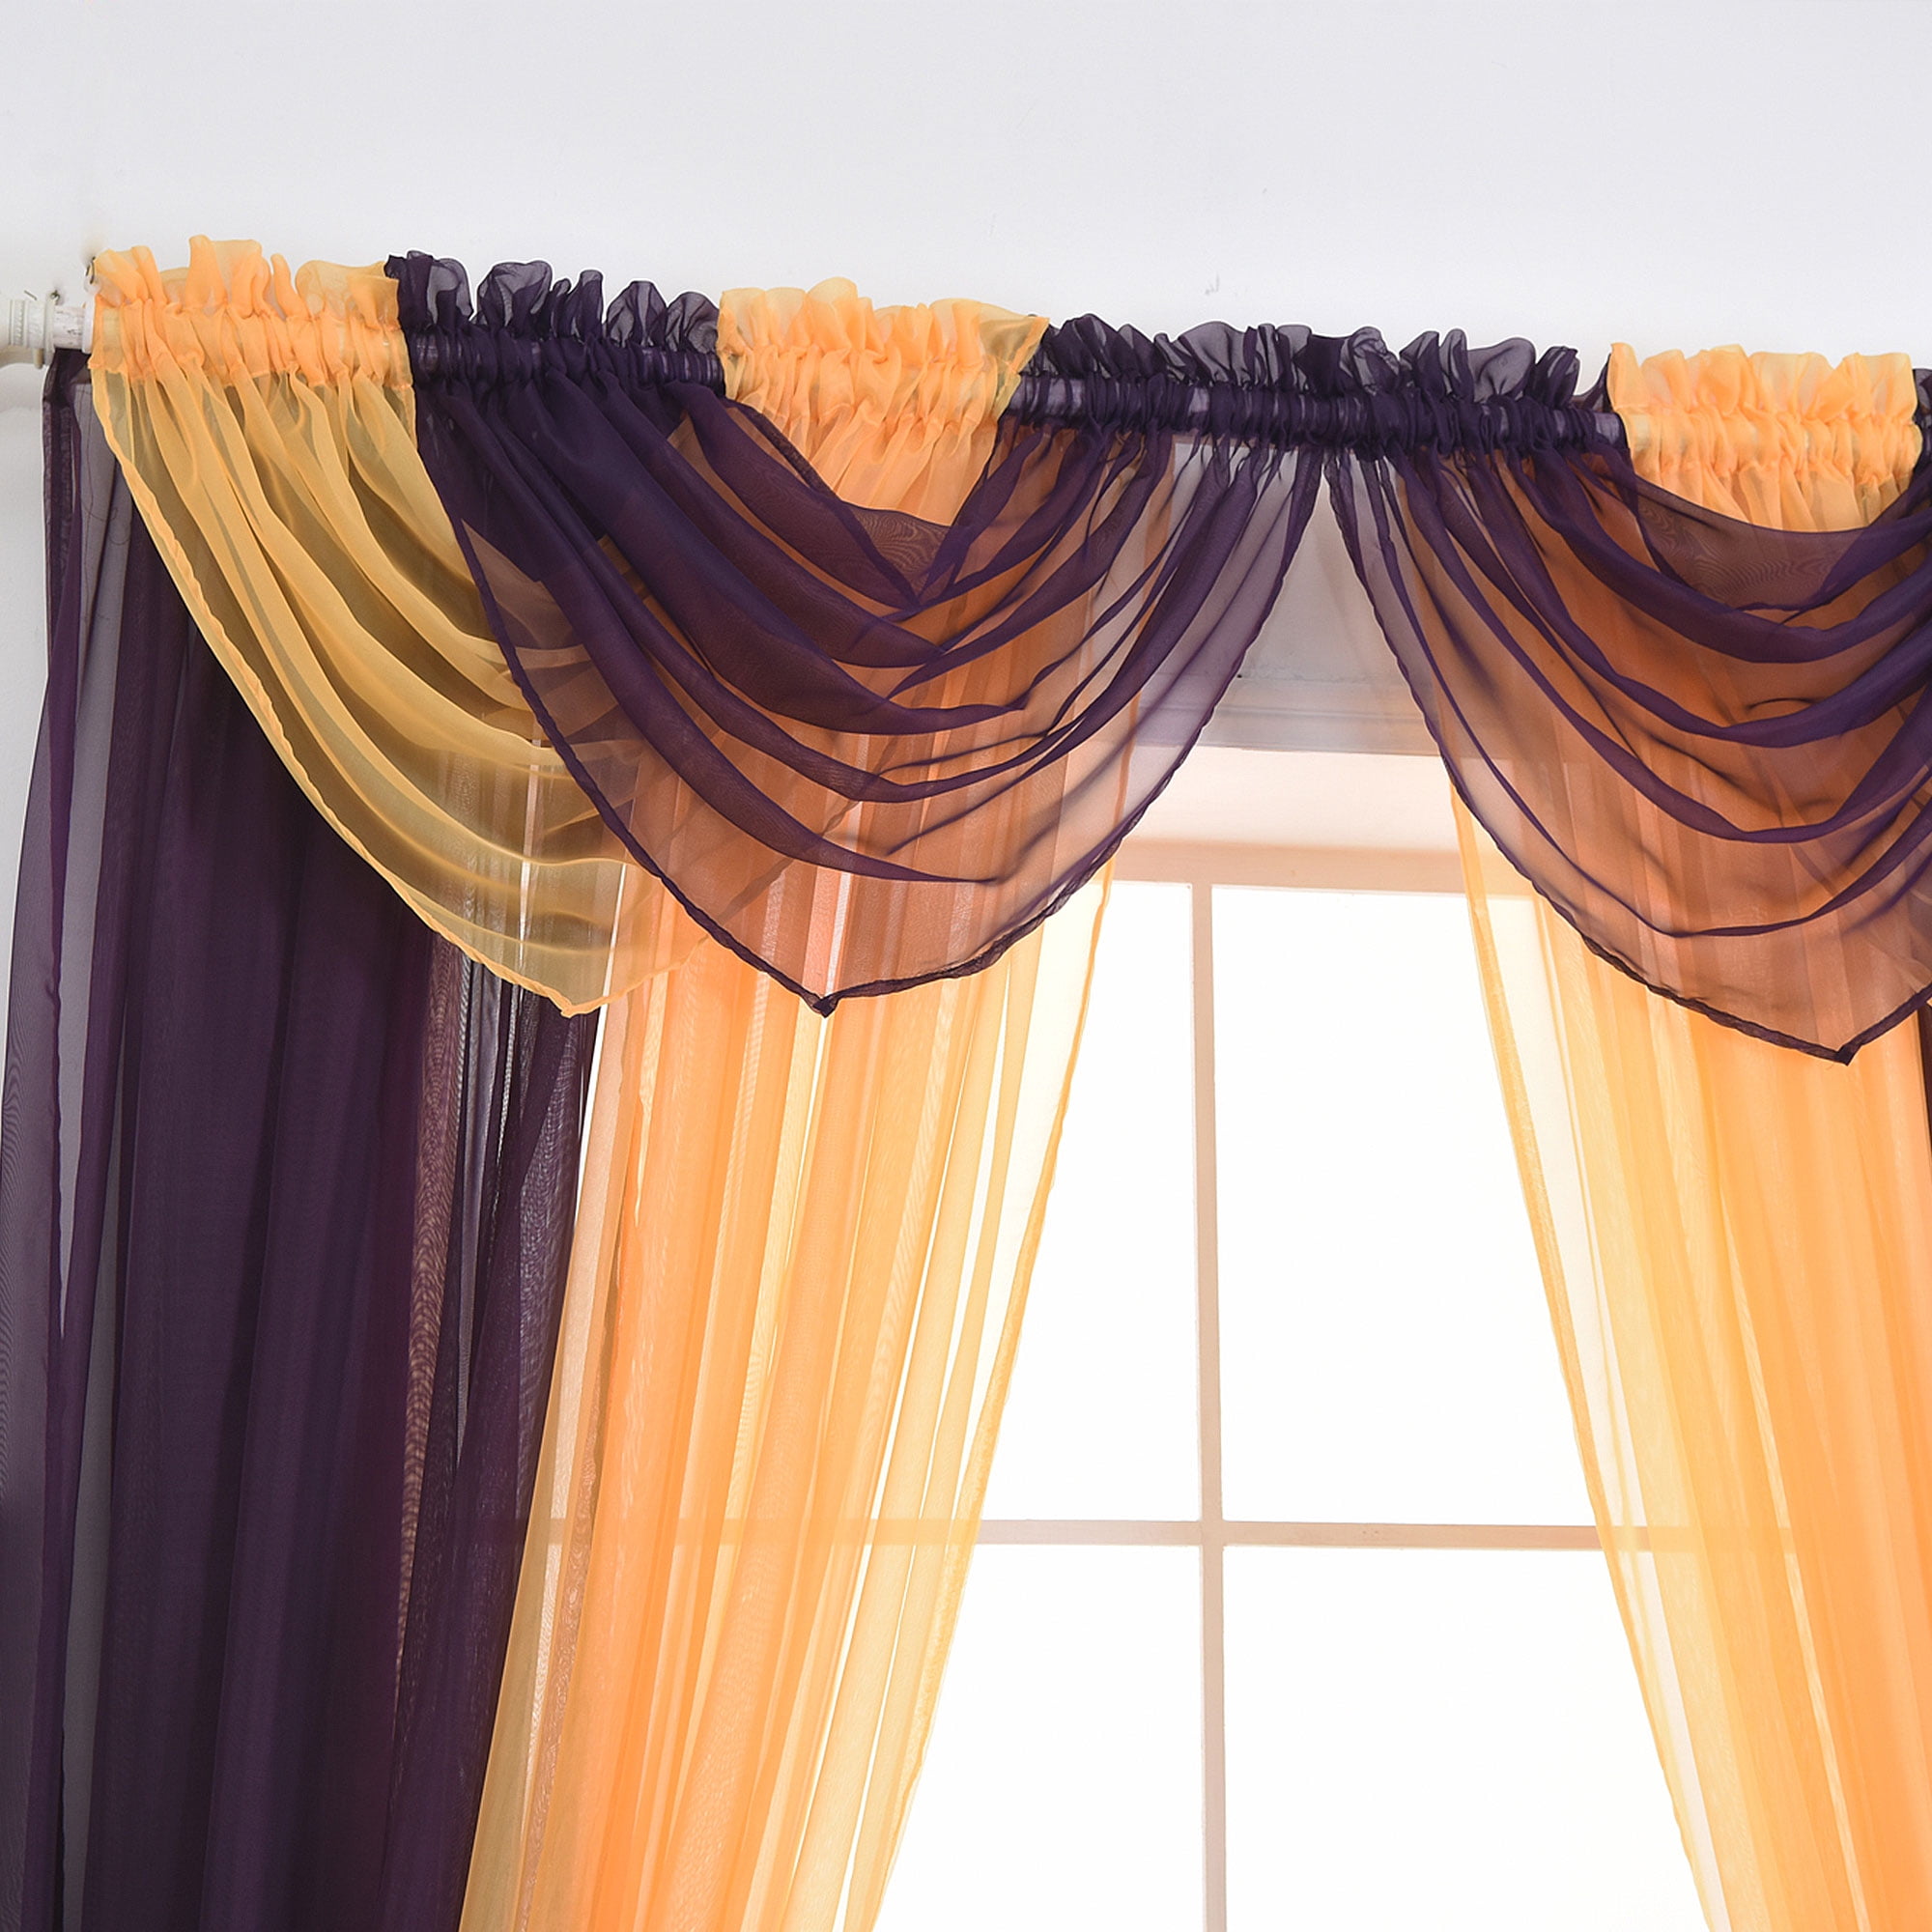 New Voile Net Curtains Ready Made with Swags Pelmet Valance Brown Black Red 